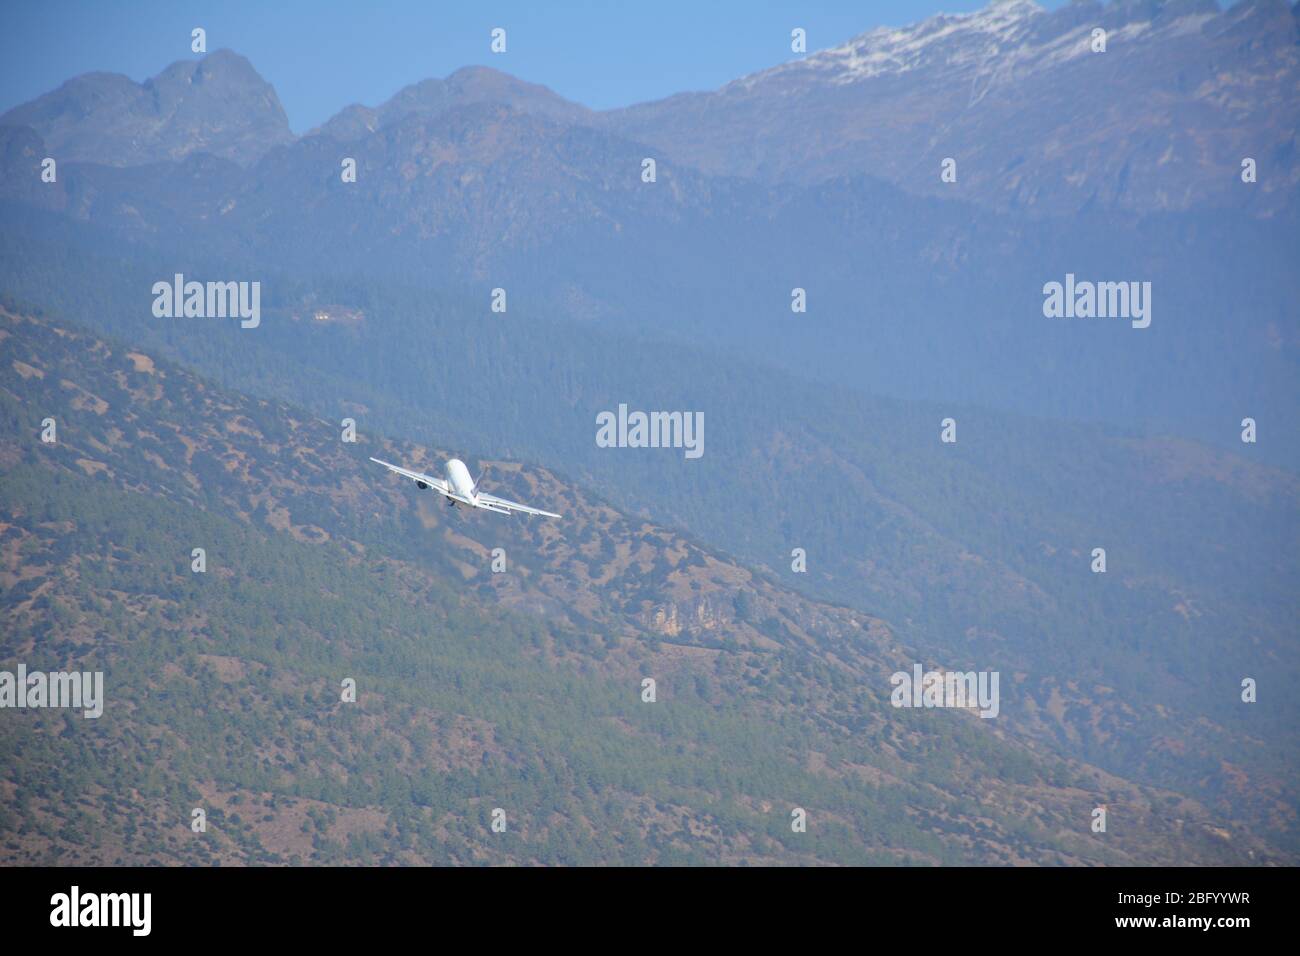 Aircraft taking off from Paro airport, Bhutan. Stock Photo